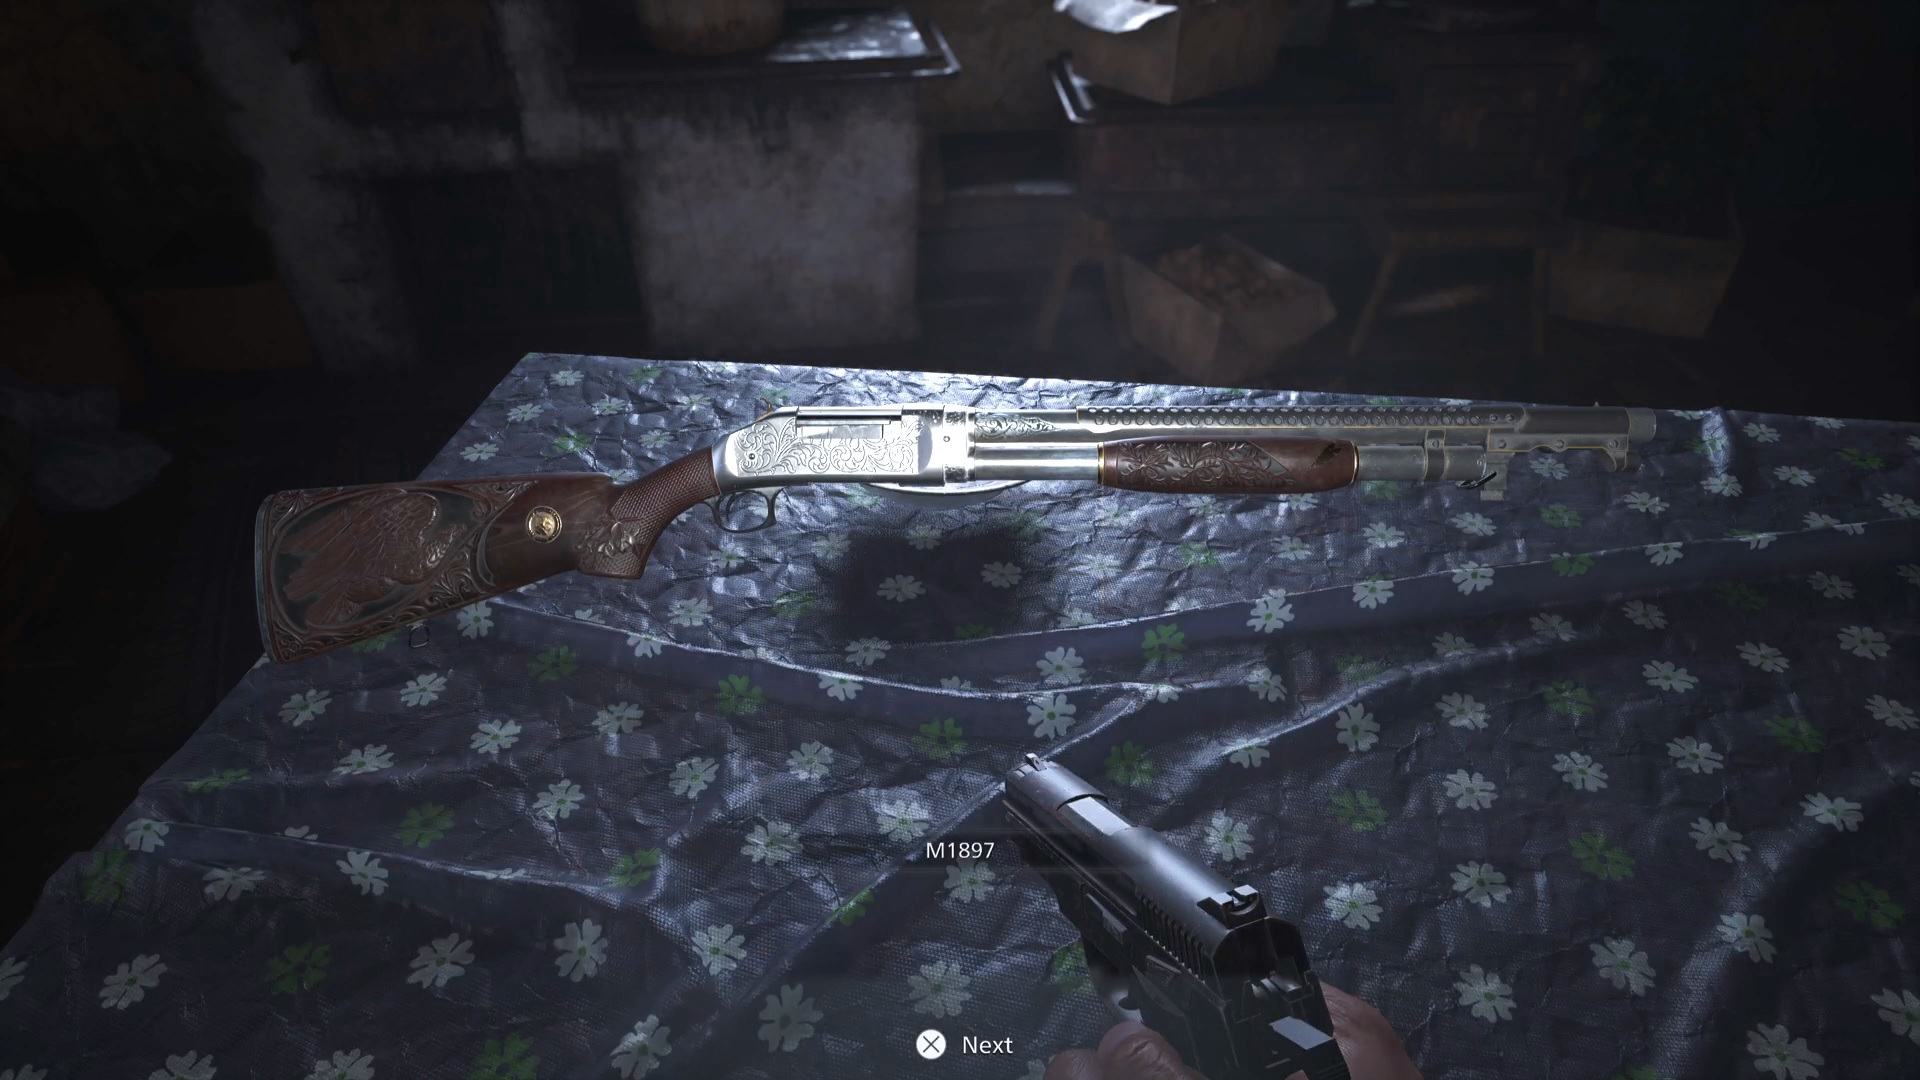 How to Get Moreau's Hidden Weapon in Resident Evil Village